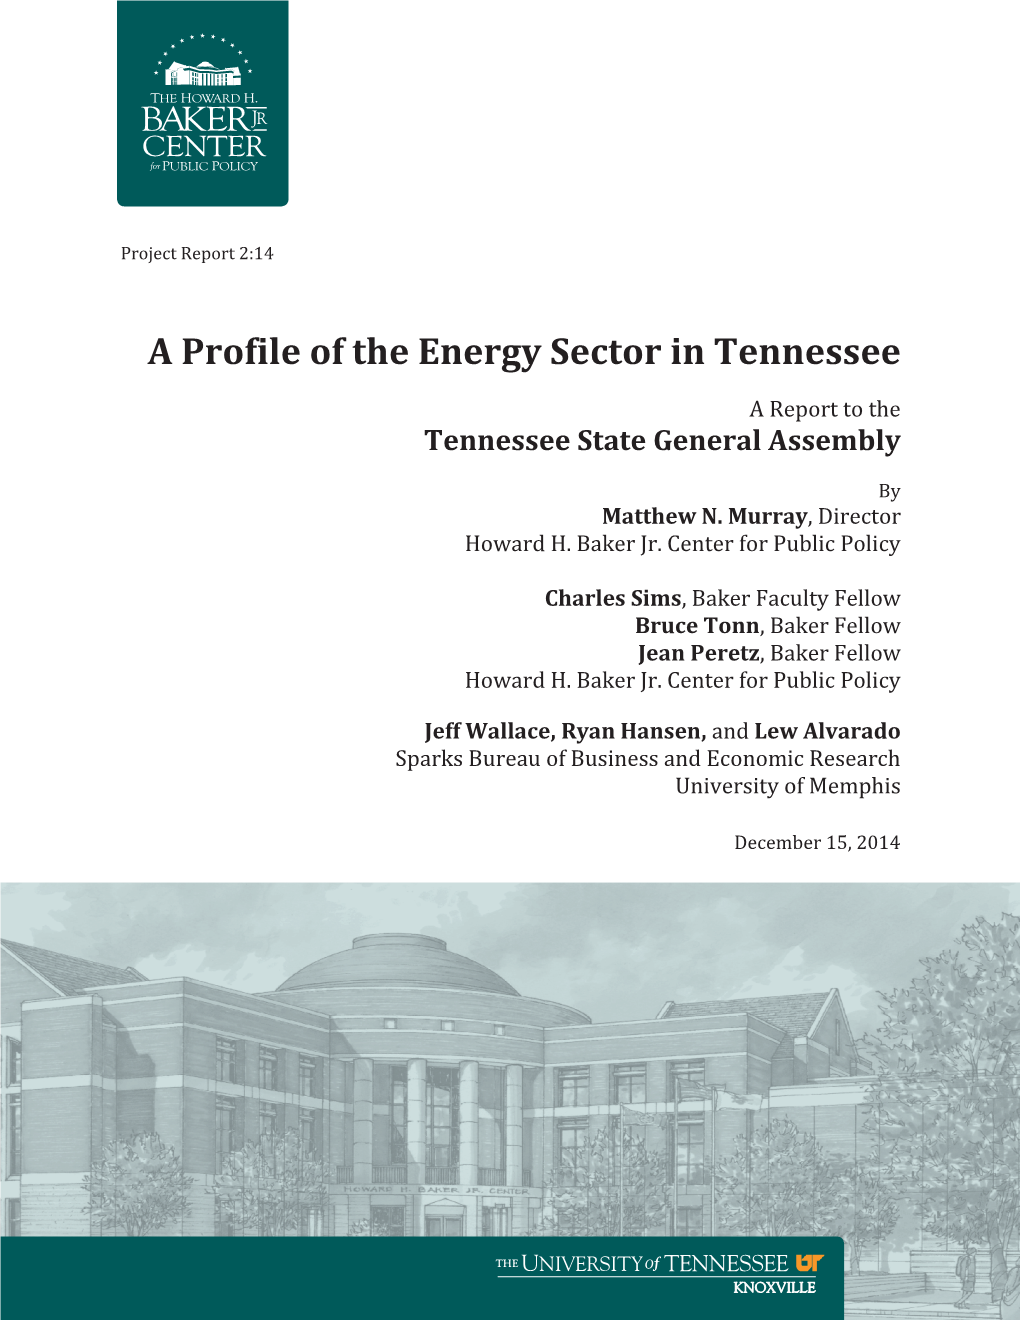 A Profile of the Energy Sector in Tennessee